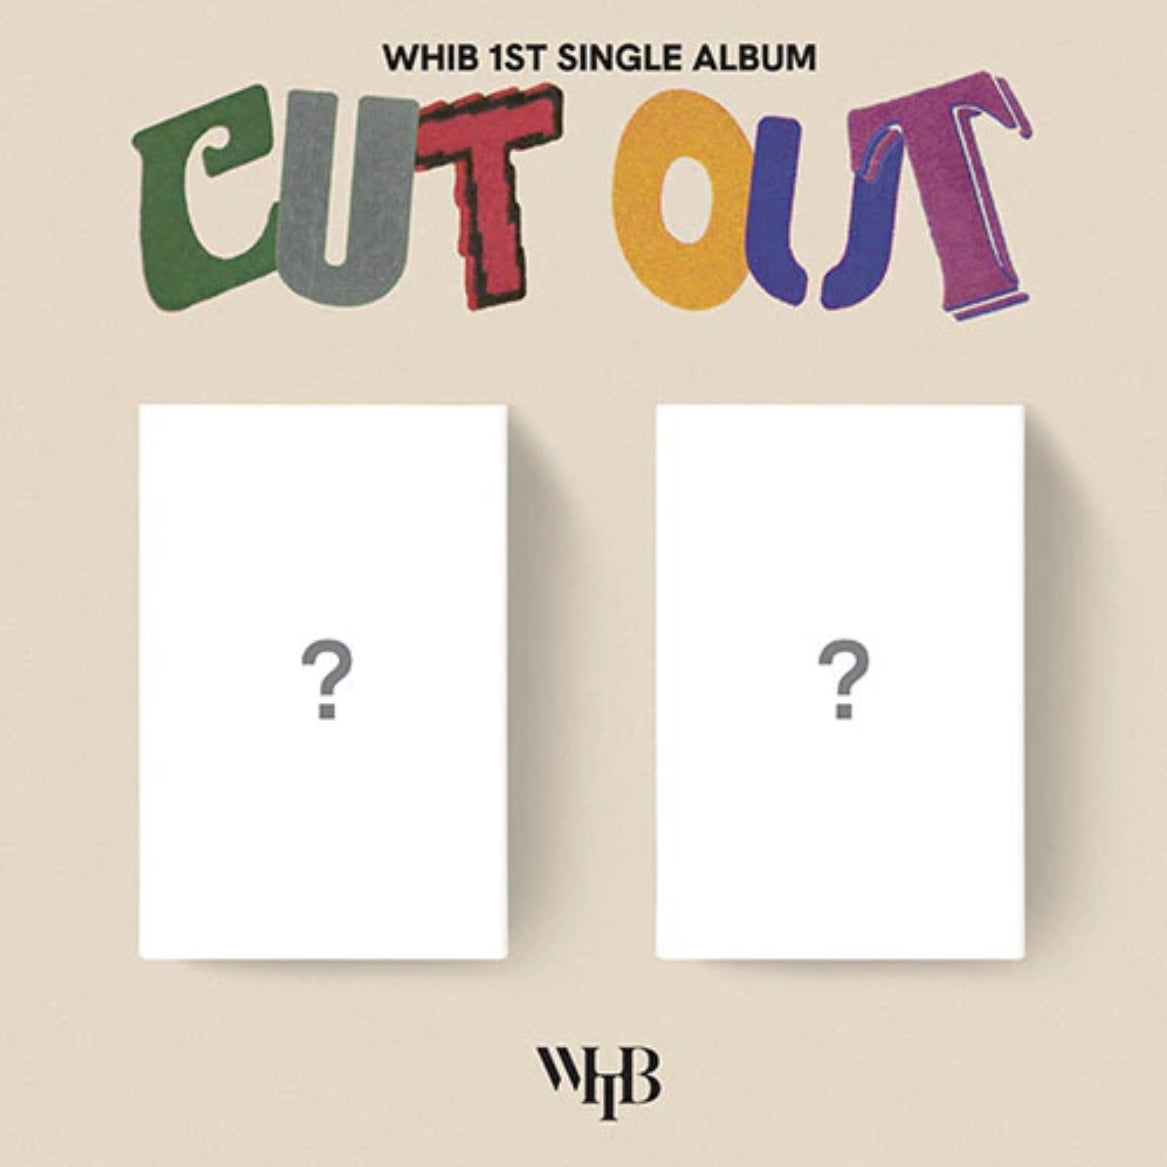 WHIB - CUT-OUT